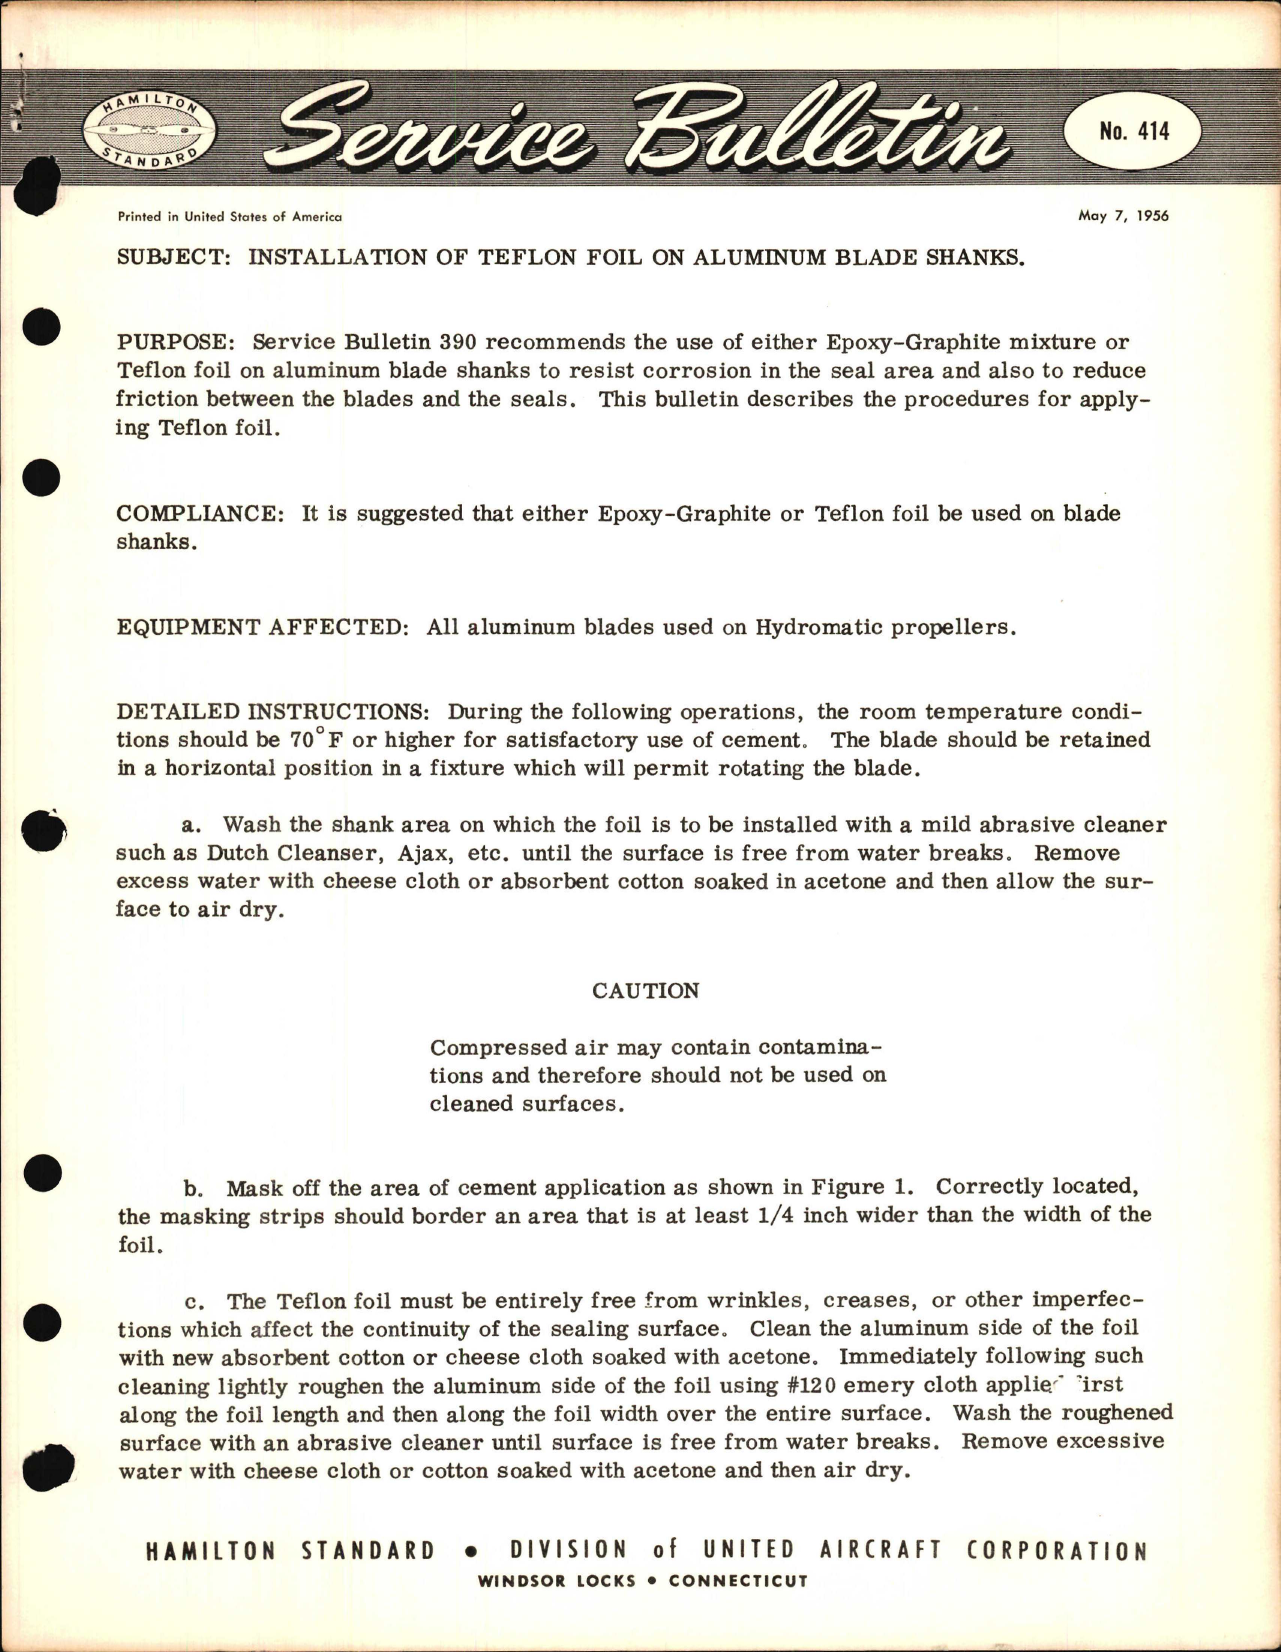 Sample page 1 from AirCorps Library document: Installation of Teflon Foil on Aluminum Blade Shanks